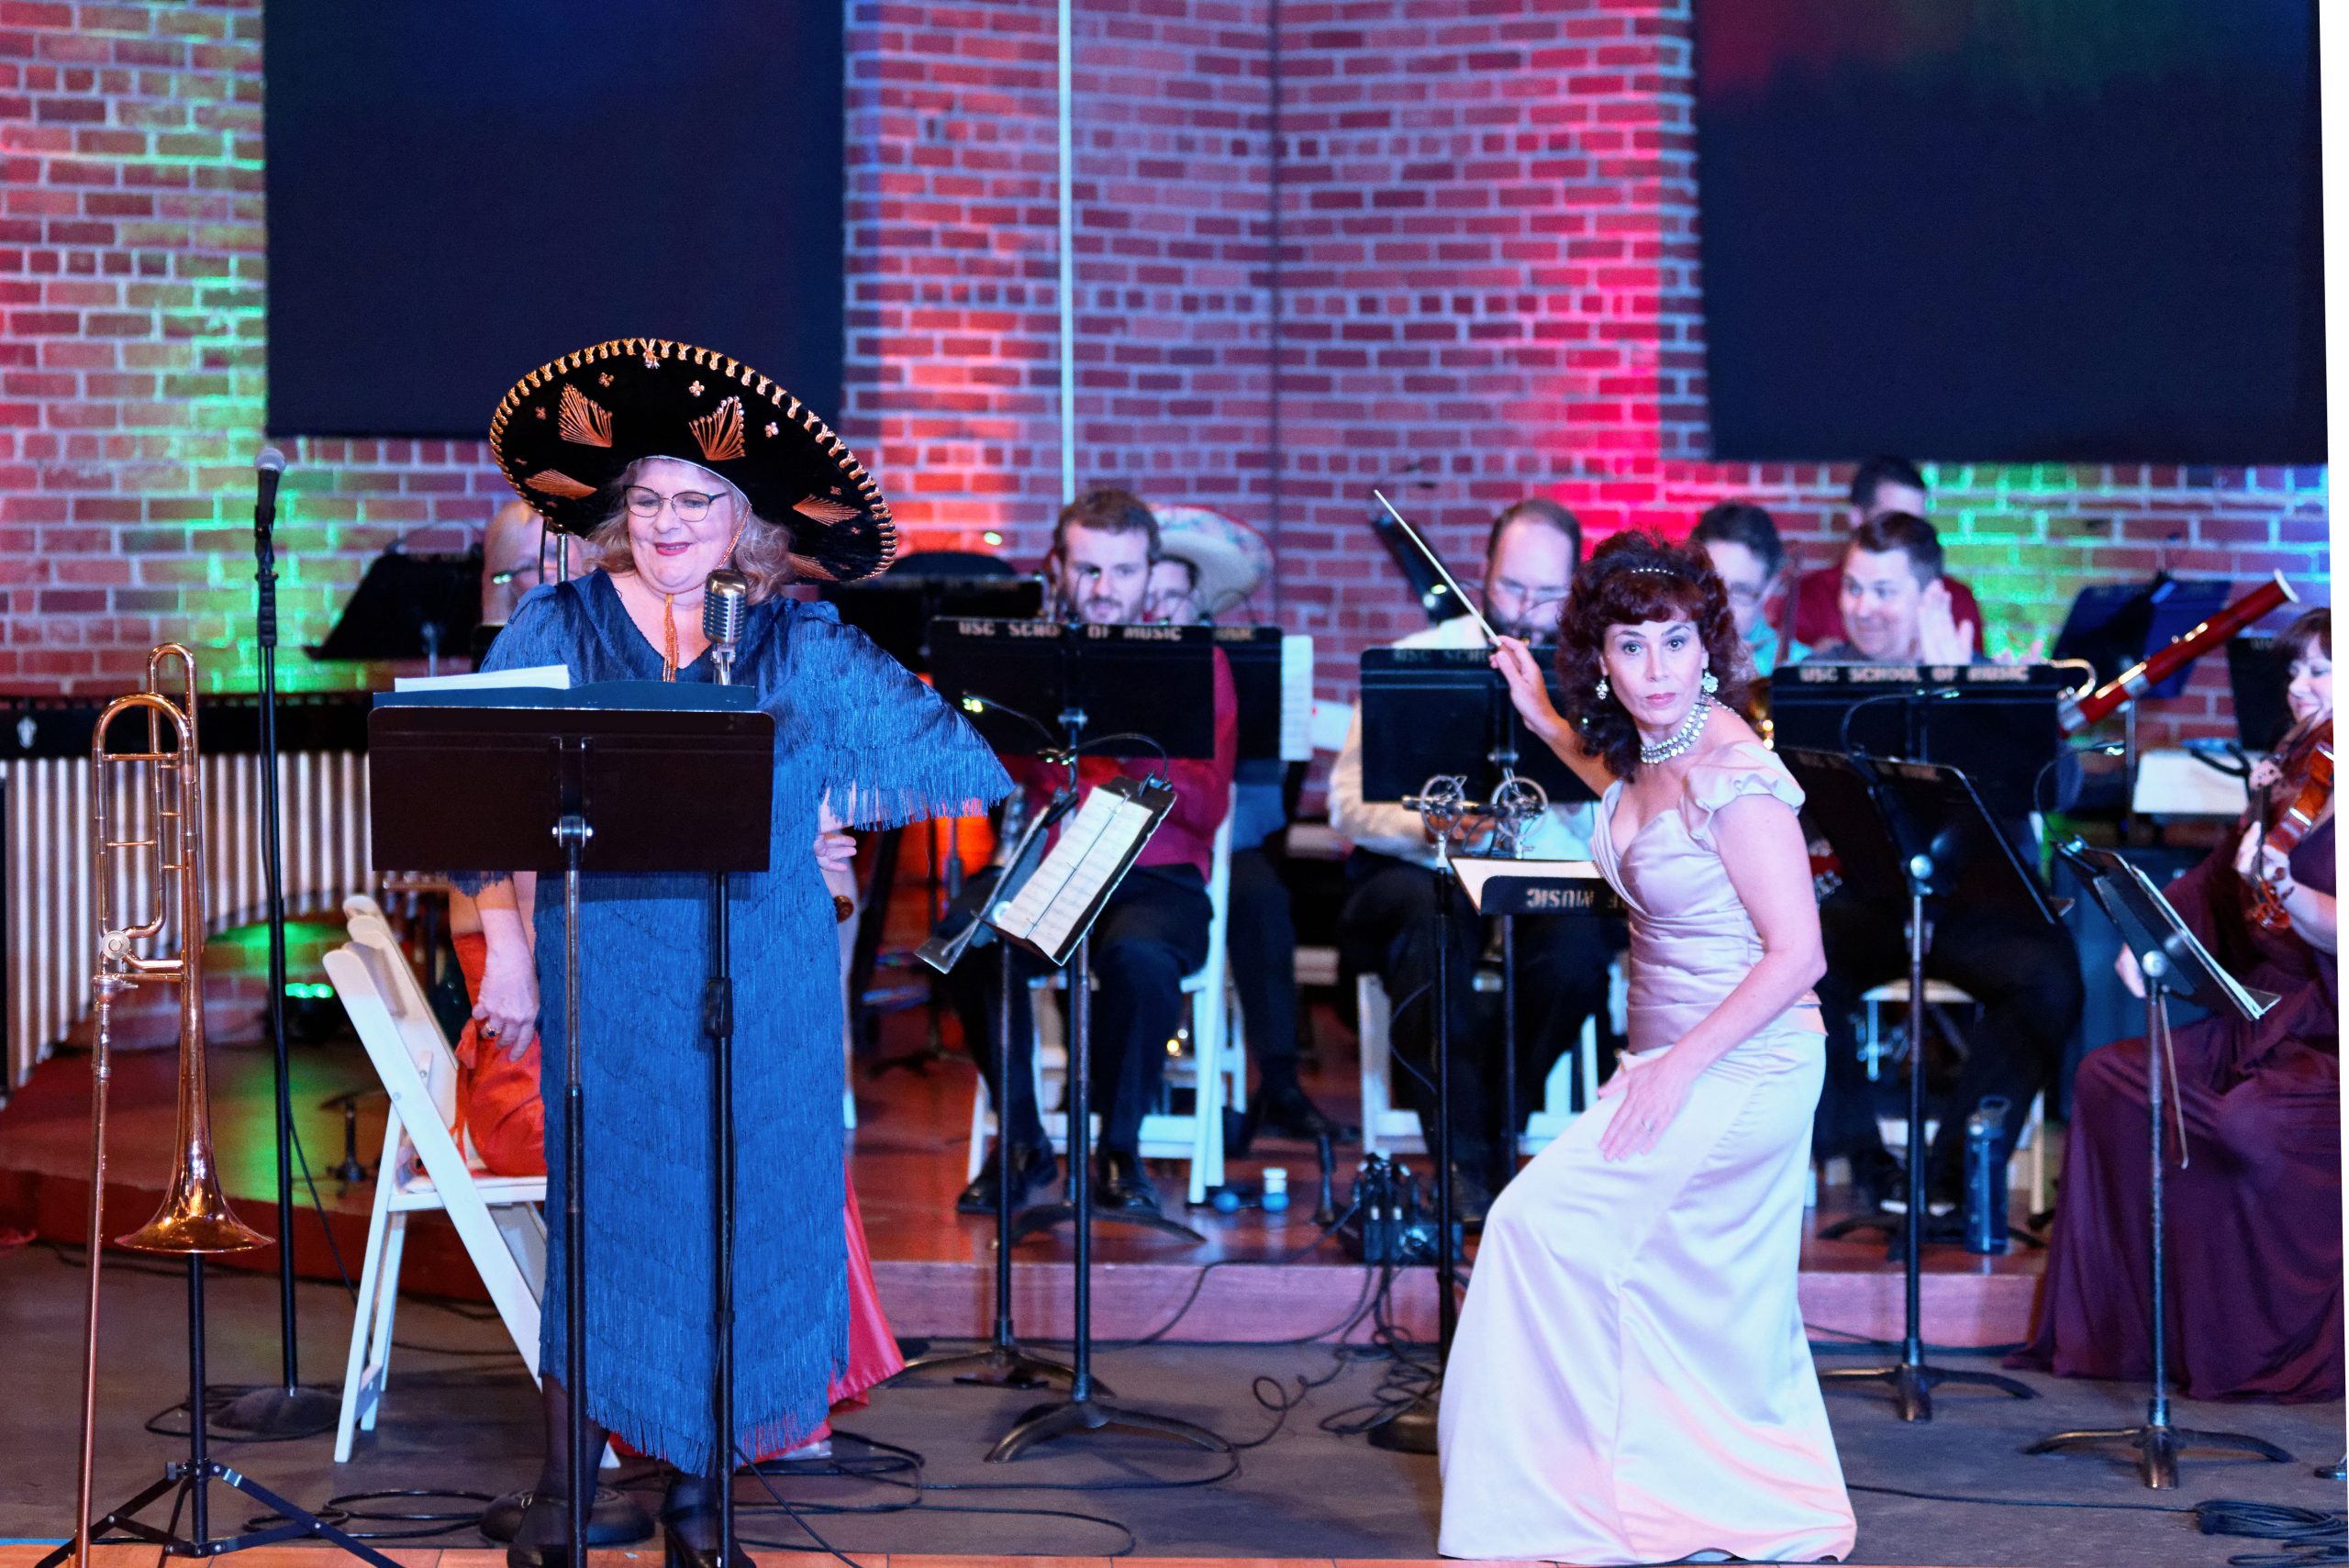 Ensemble Eclectica’s production of We Could Have Danced all Night! from 2018. Janet Hopkins sings “Mexican Hat Dance” with folk song arrangement by Dick Goodwin. Suzanna is Ensemble Eclectica’s founder, artistic and music director. Photography courtesy of Dimitry Pavlovsky